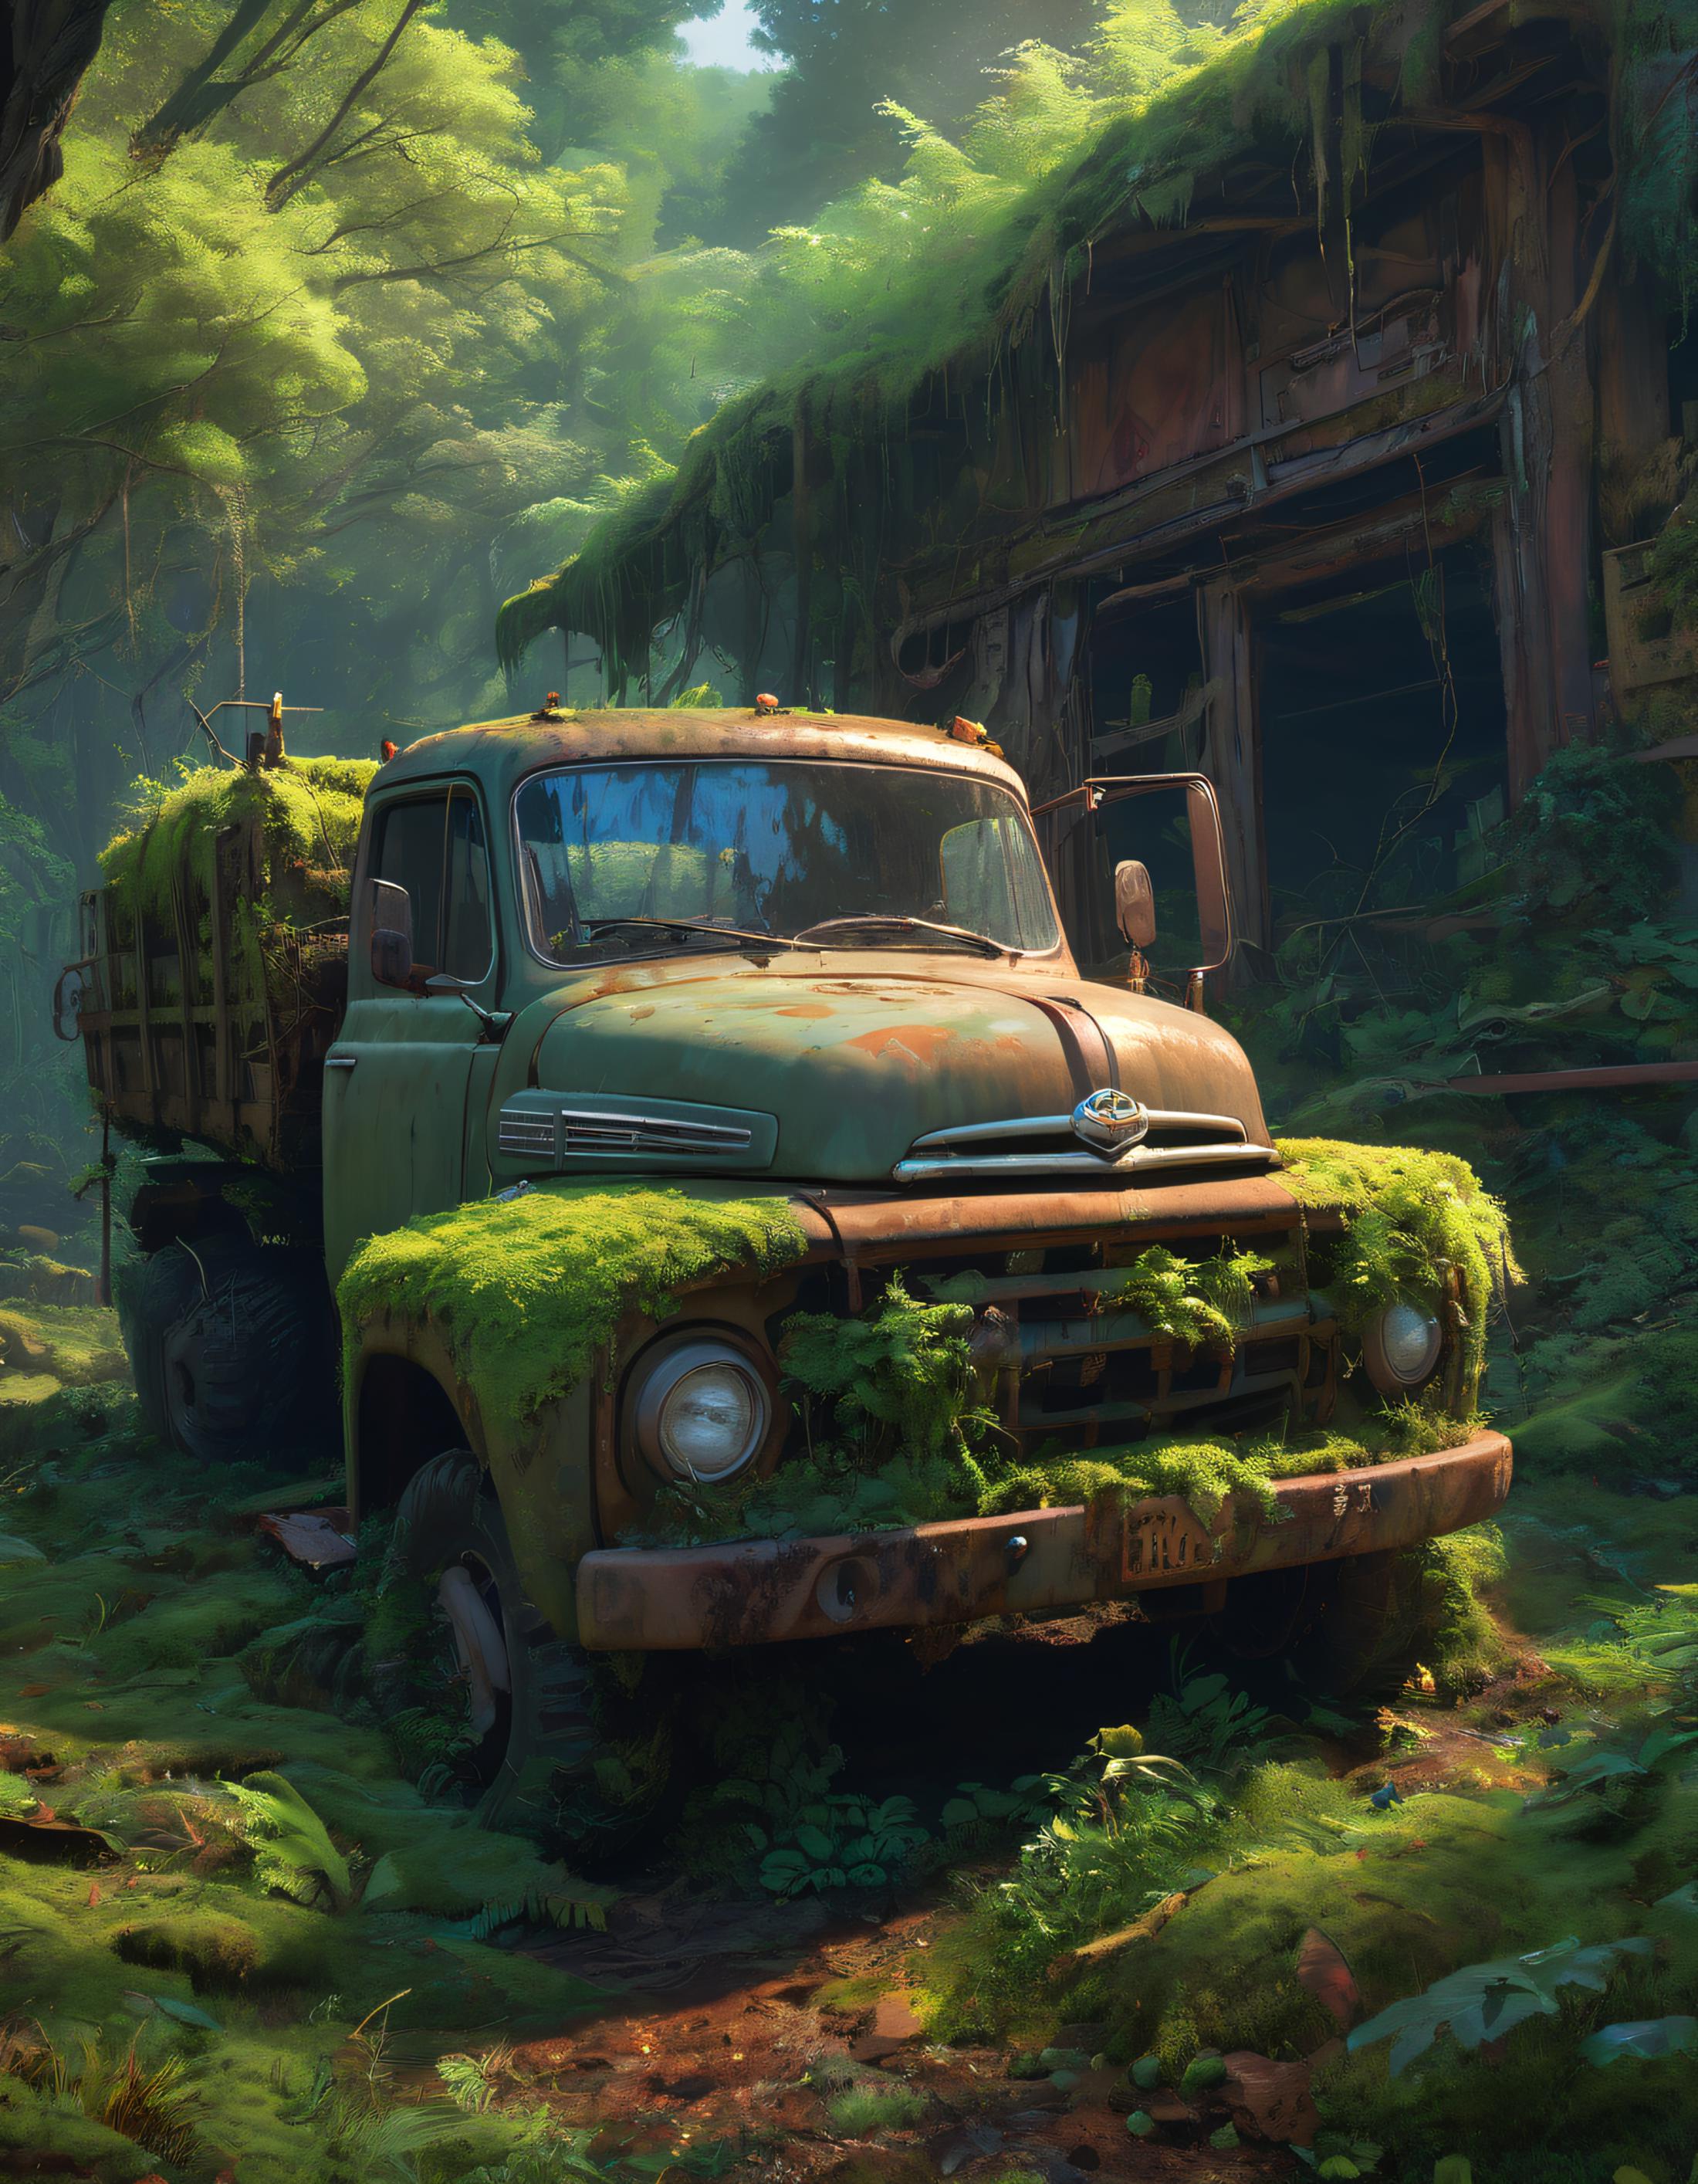 An old truck covered in moss and vines.